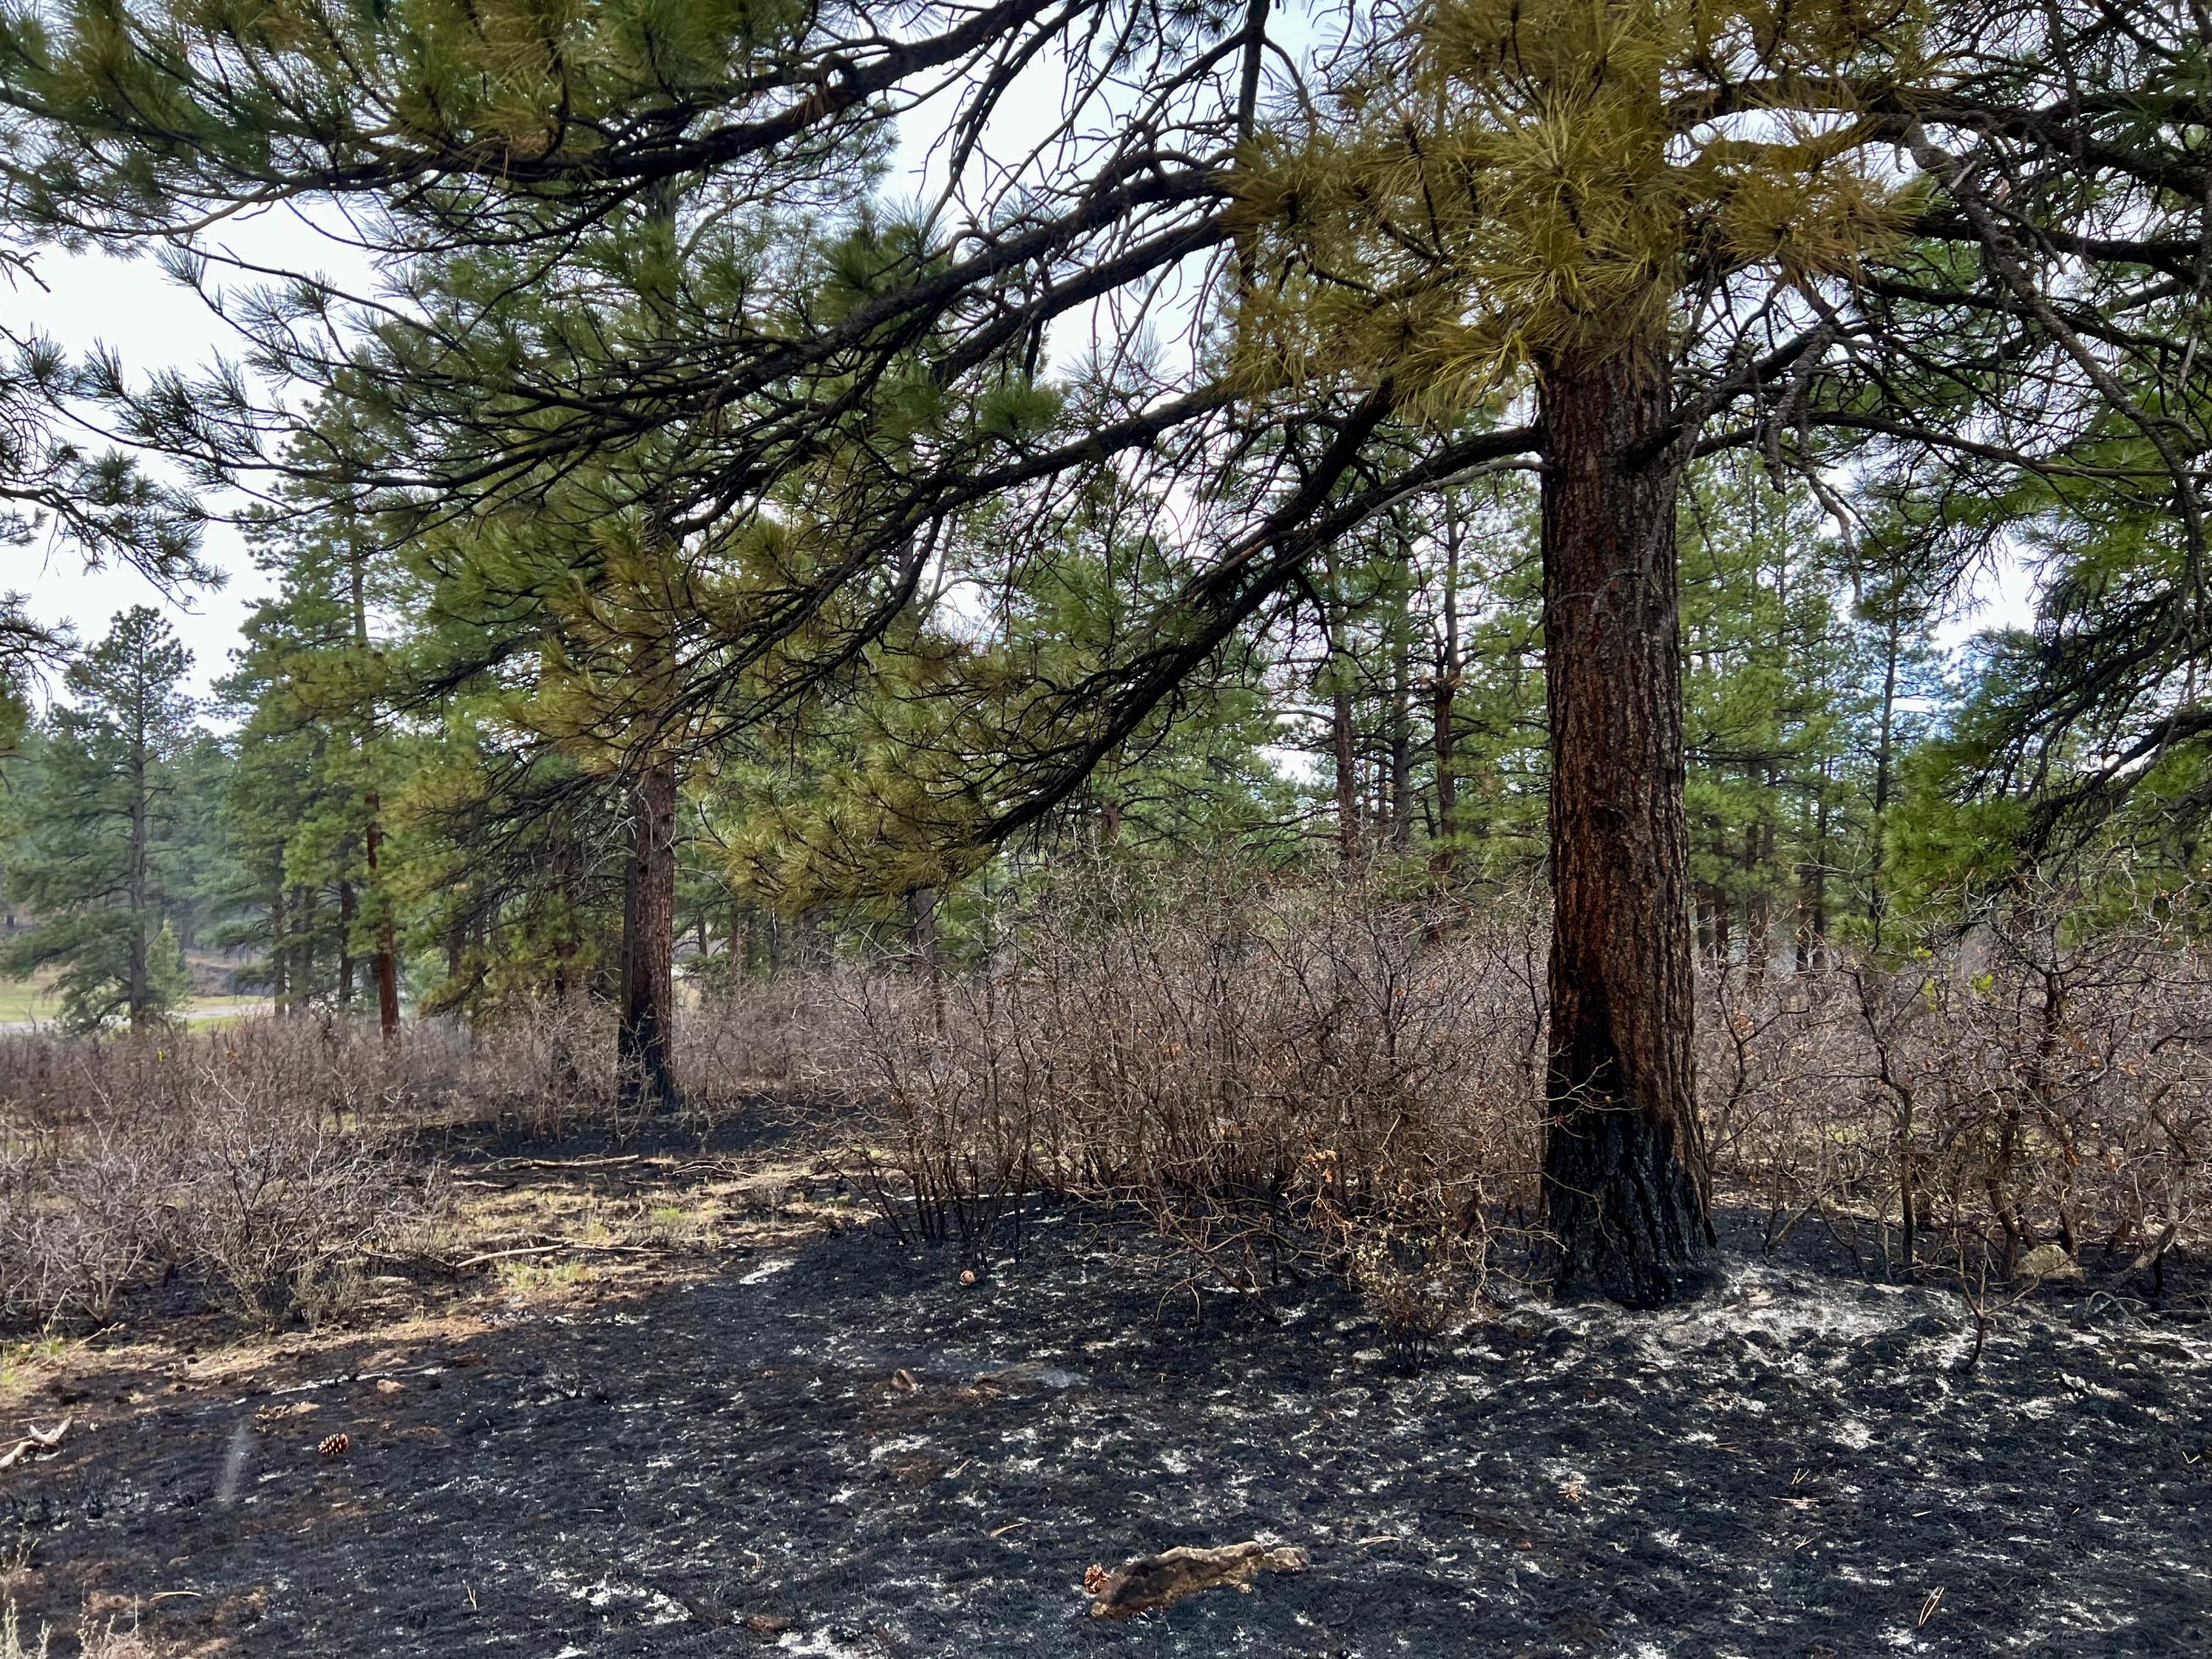 A Ponderosa Pine is seen with some partially scorched pine needles.